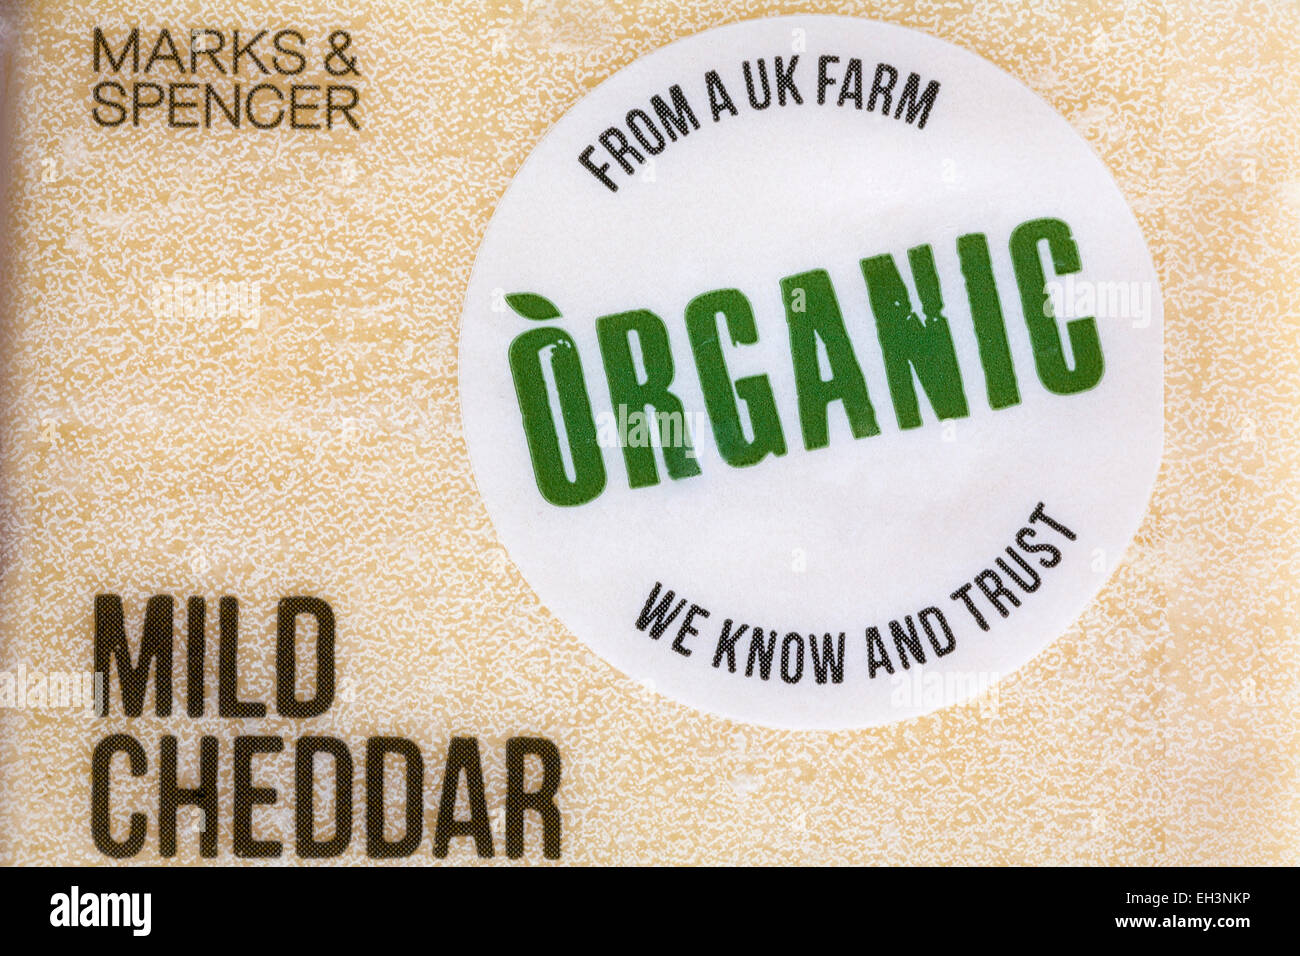 Marks & Spencer mild cheddar cheese - organic from a UK farm we know and trust Stock Photo